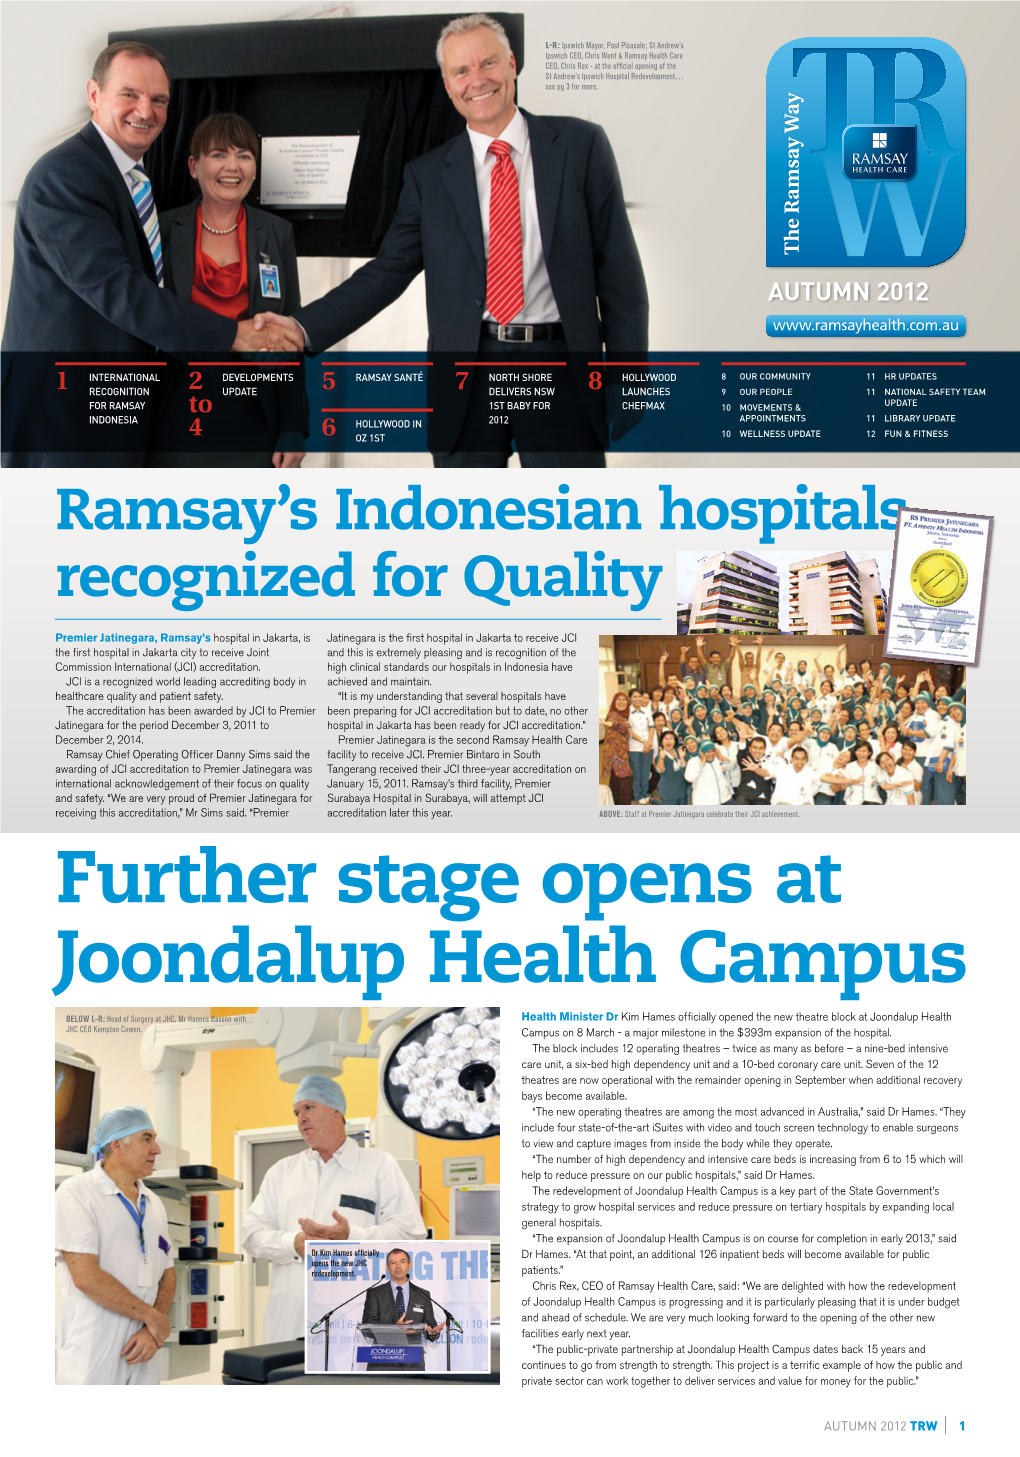 Further Stage Opens at Joondalup Health Campus